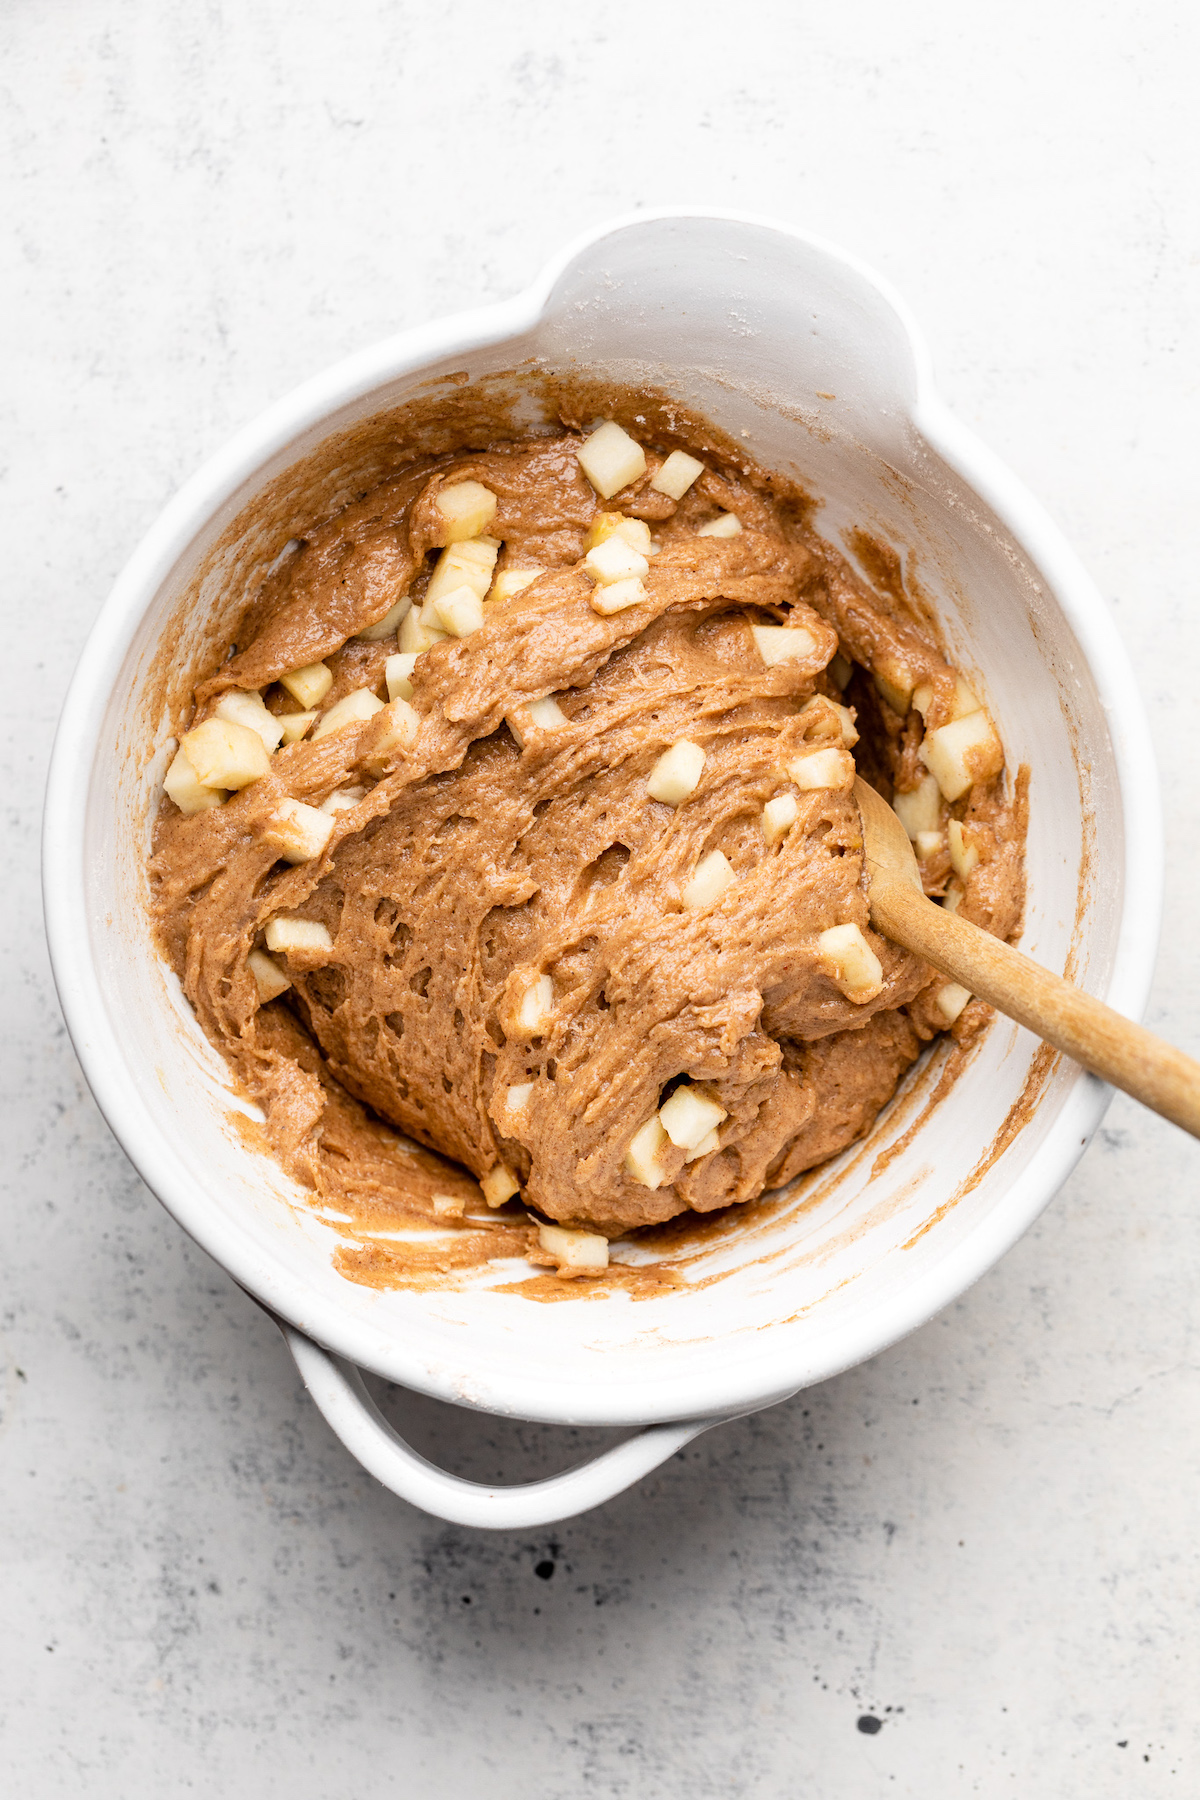 Wooden spoon stirring diced apples into coffee cake batter.